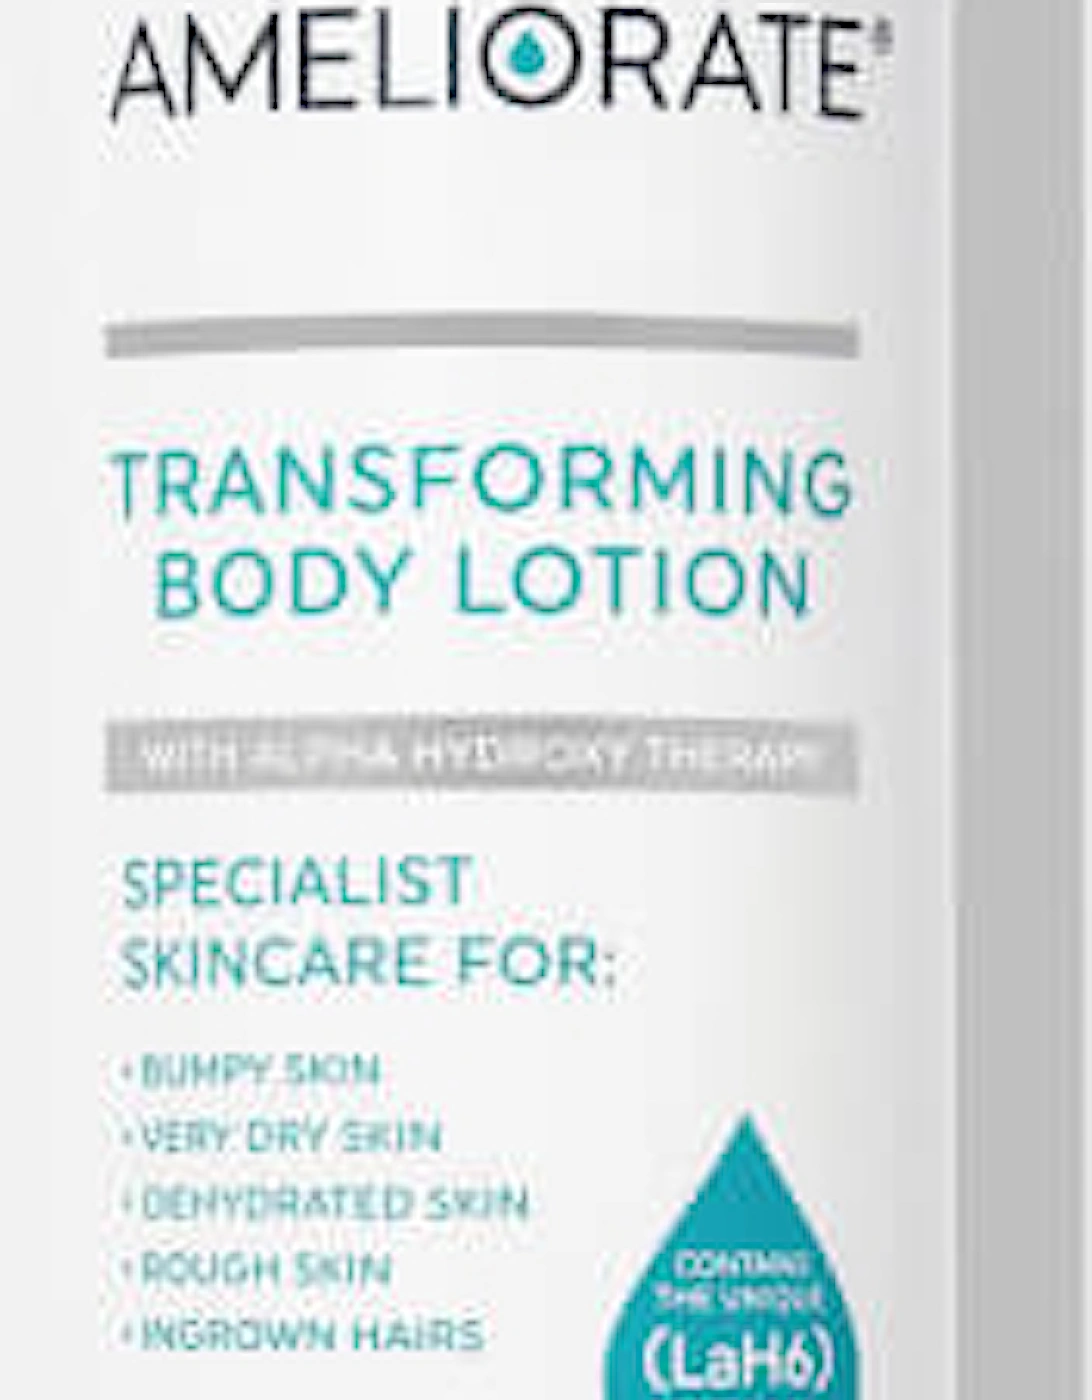 Transforming Body Lotion 500ml (Fragrance Free) - AMELIORATE, 2 of 1